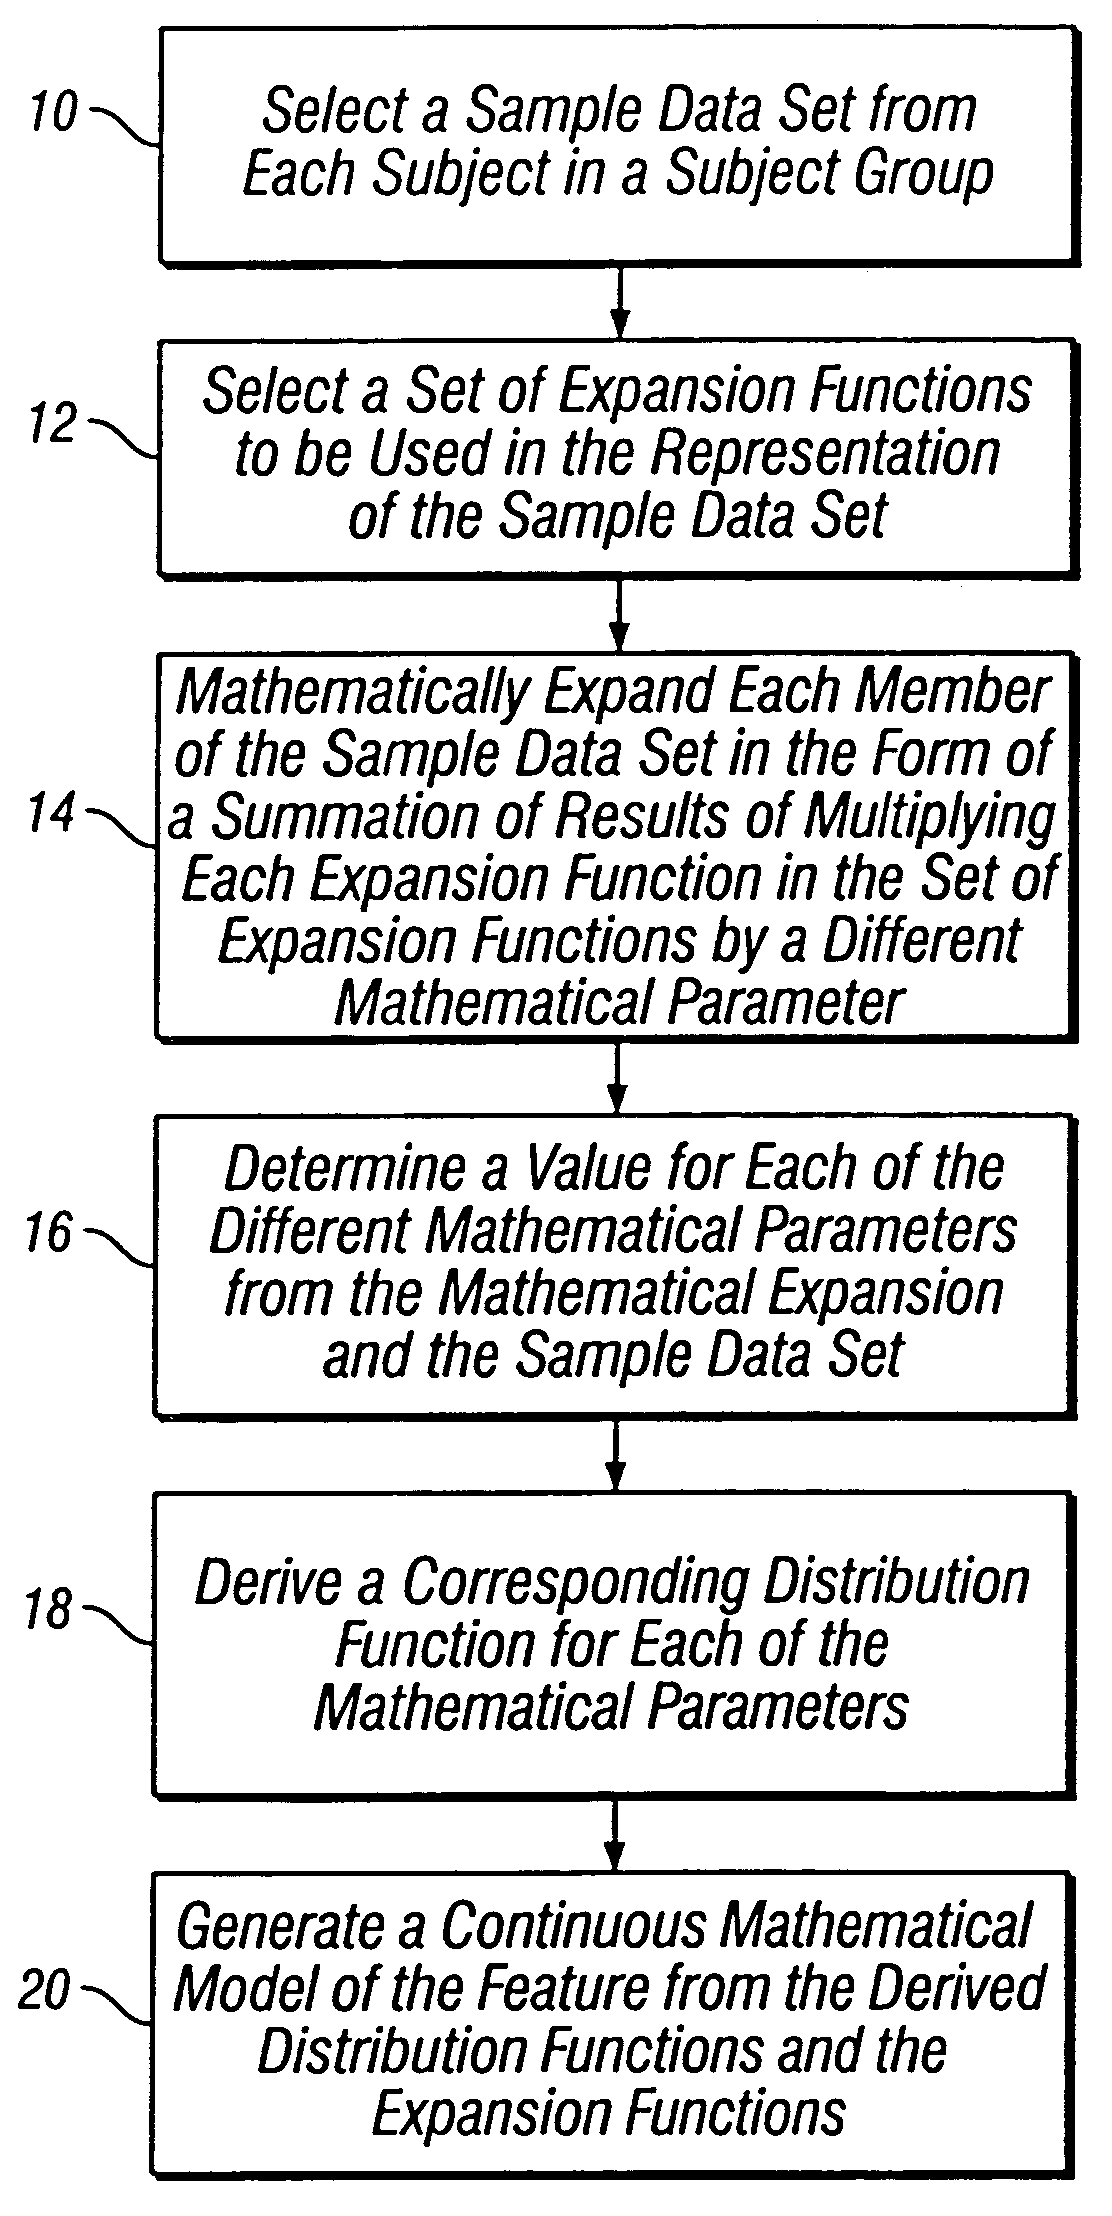 Generation of continuous mathematical model for common features of a subject group